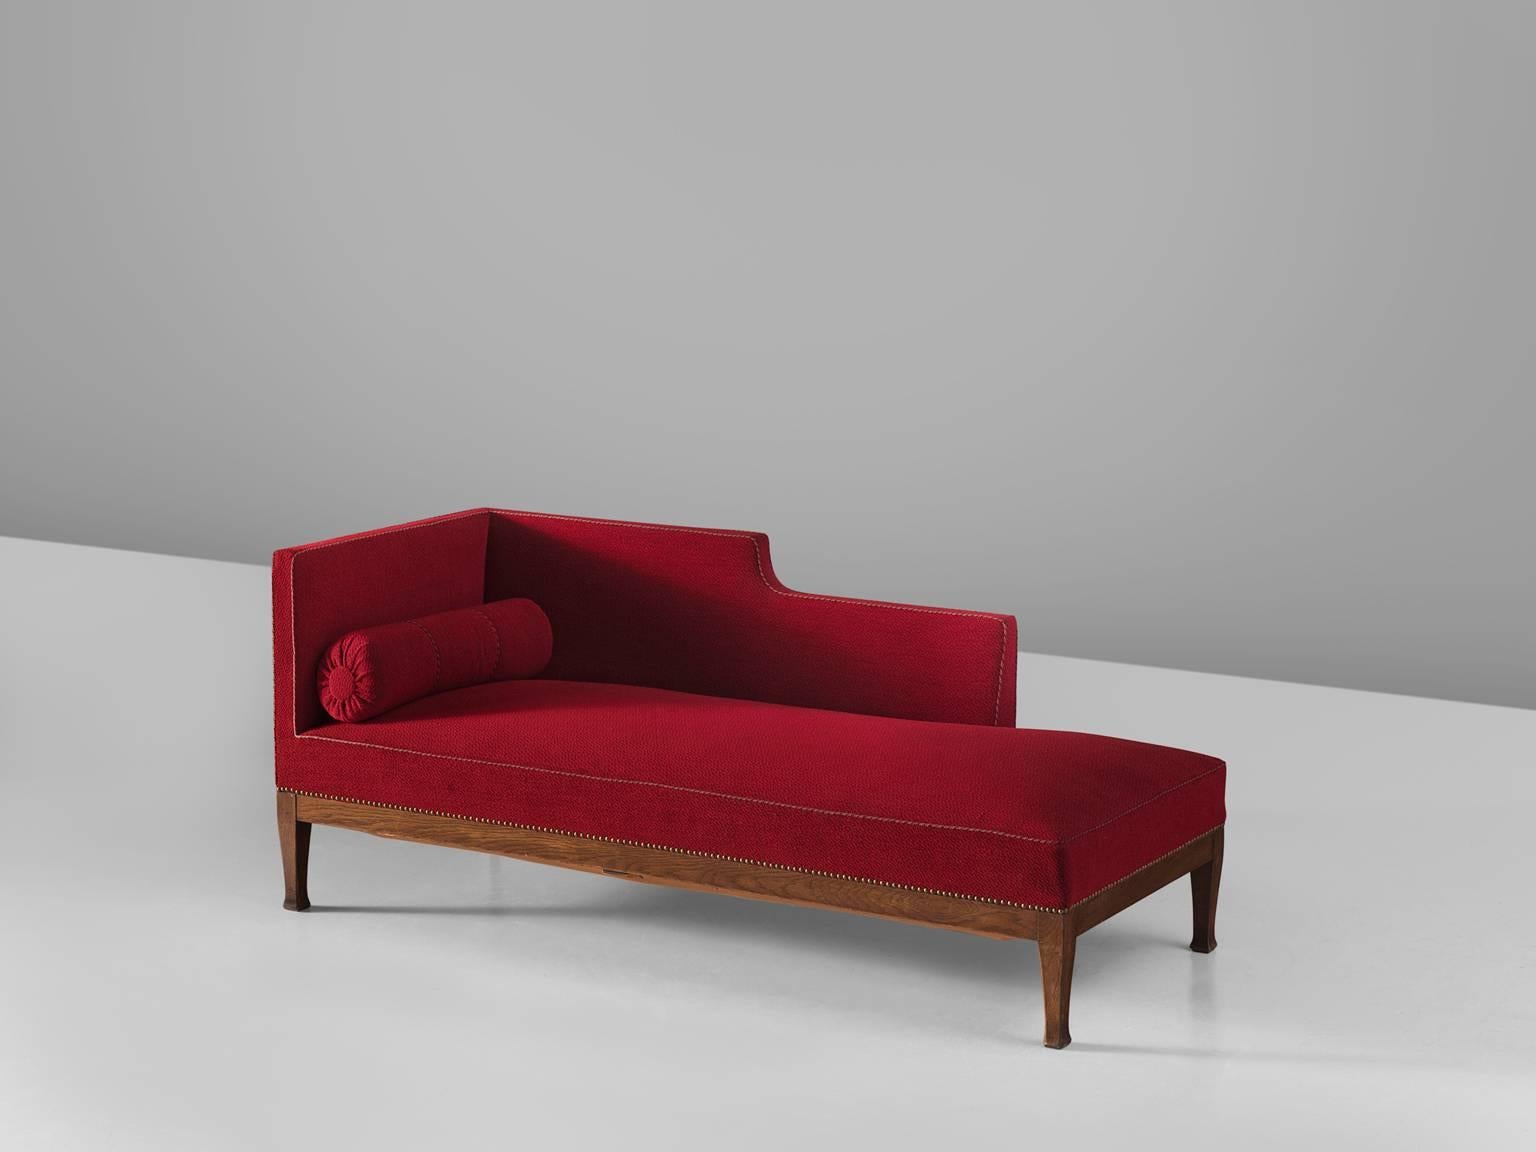 Daybed presumably by Chambert's Möbelfabrik red upholstery, oak, brass, Sweden, 1930s.

This freestanding daybed goes with the title “Swedish Grace” and features a dark polished oak frame in combination with a deep red upholstery. The daybed has a